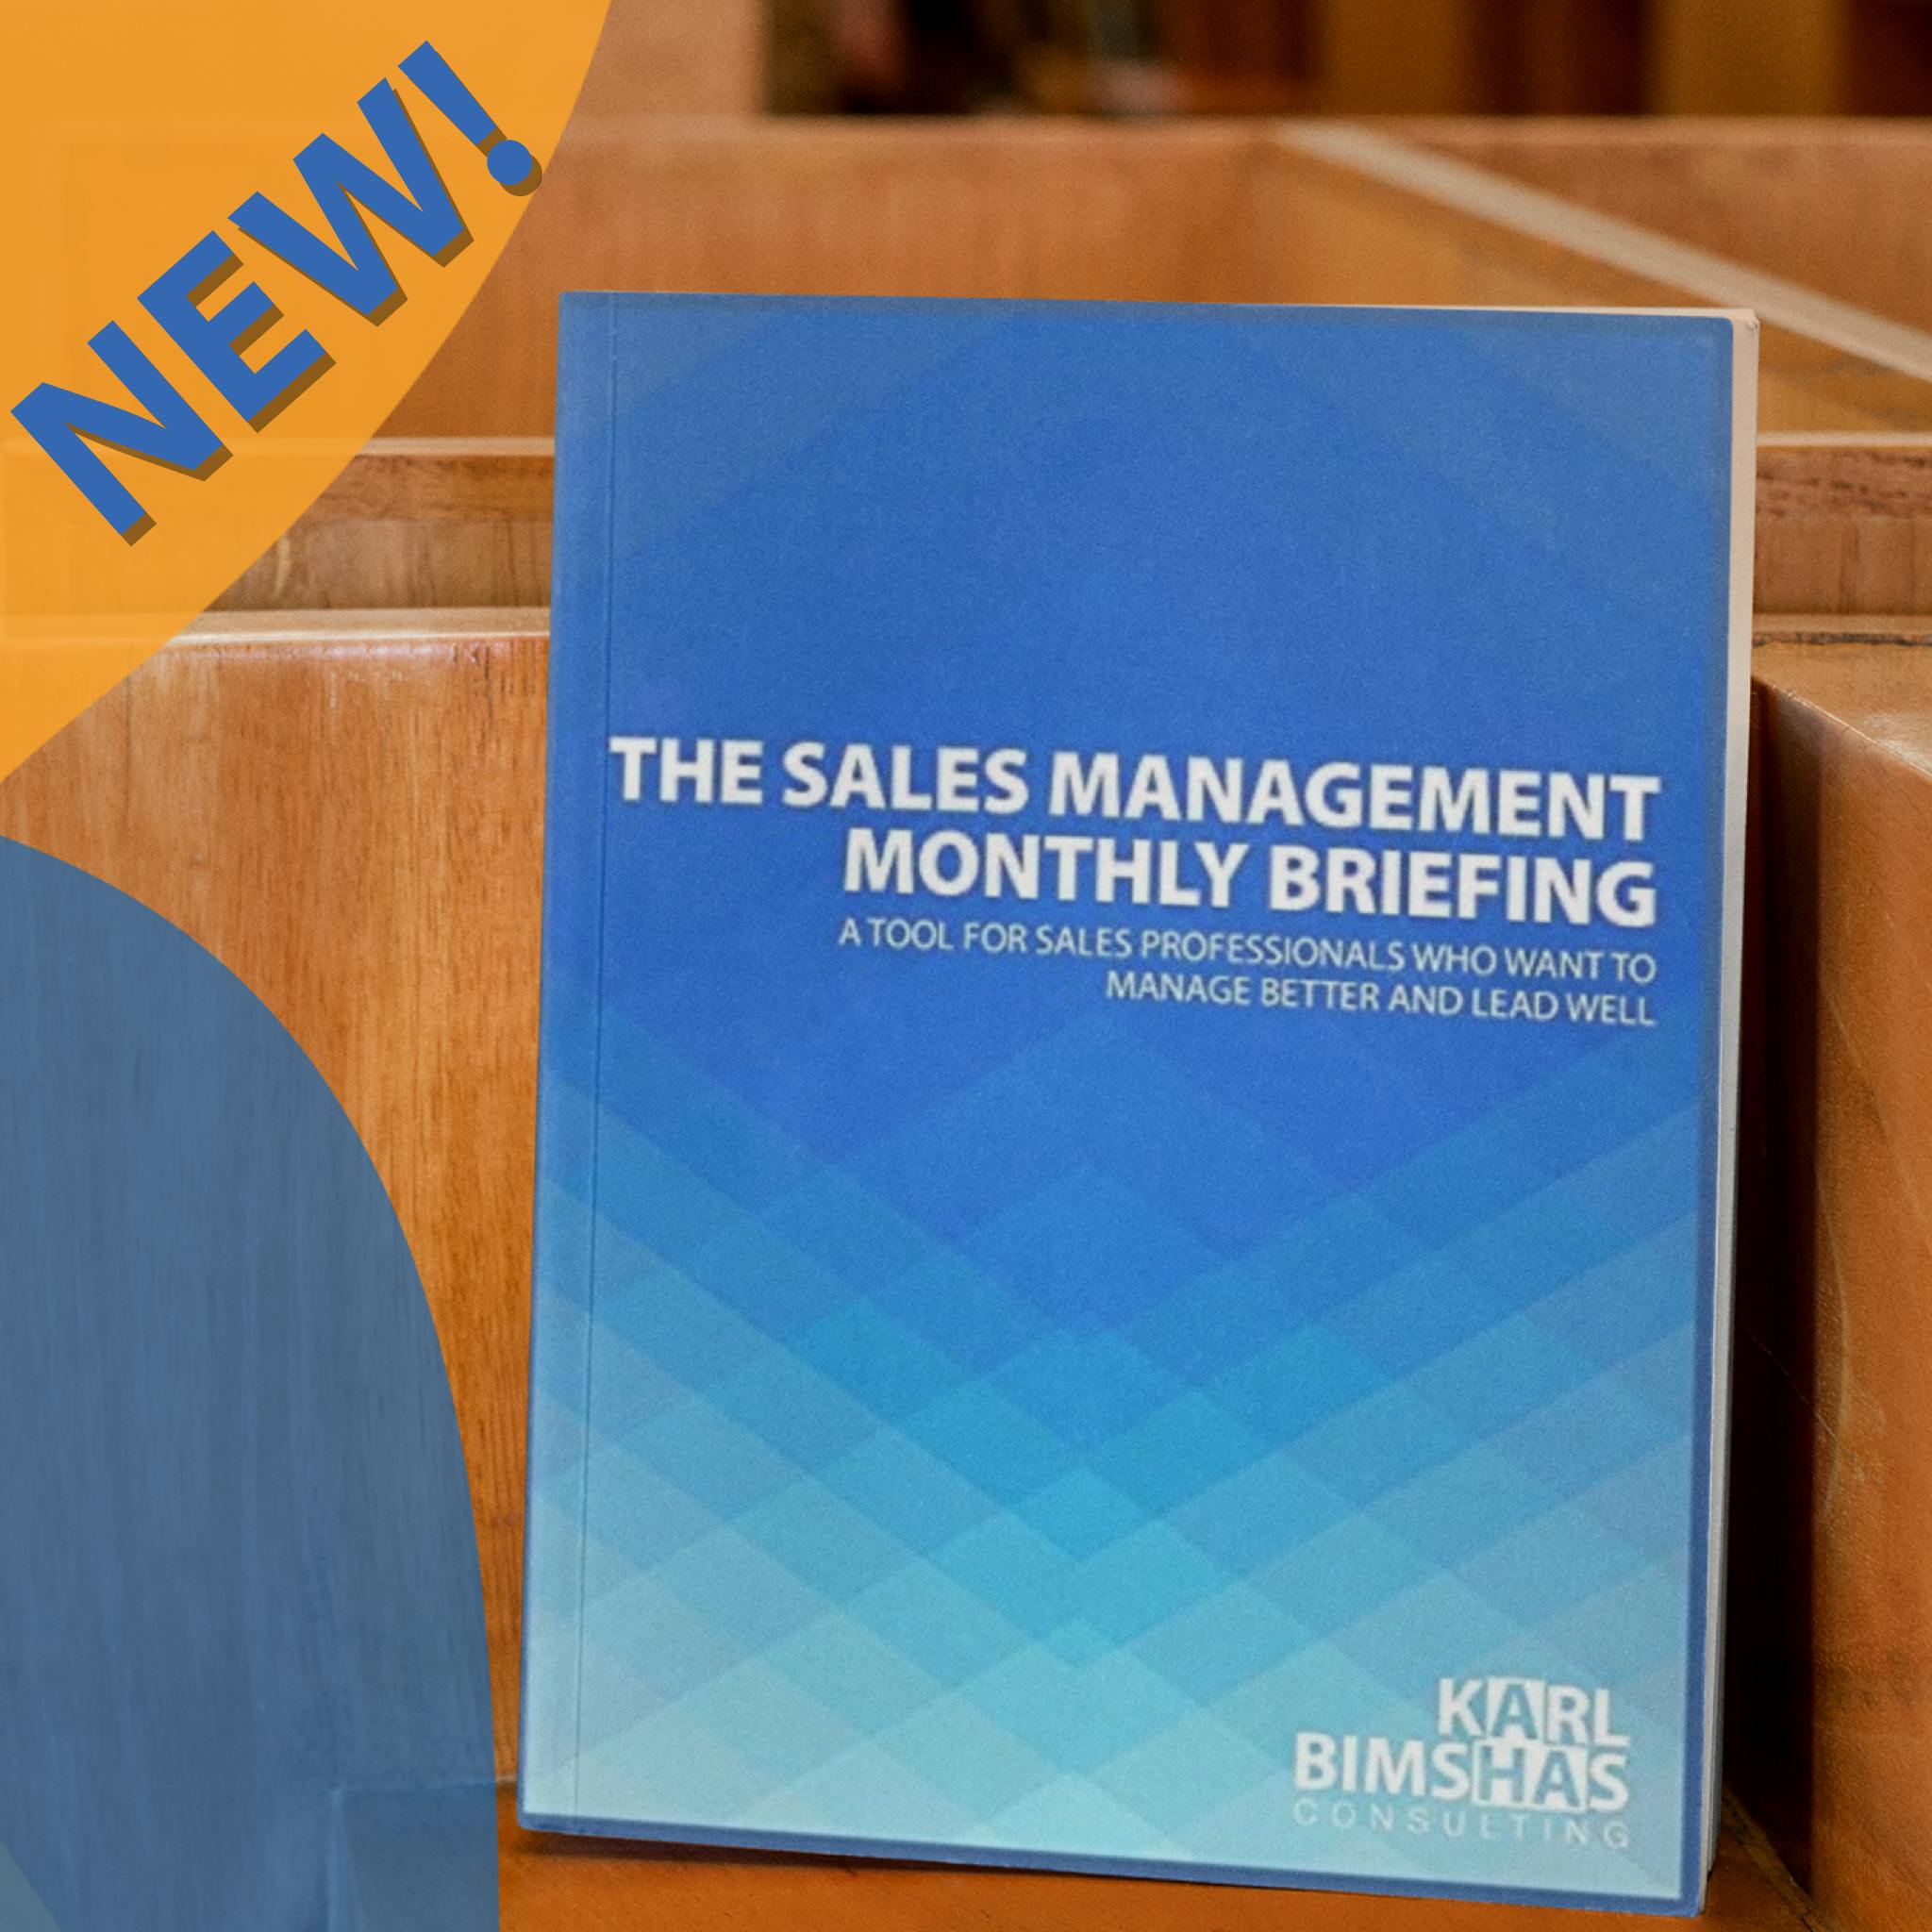 The Sales Management Monthly Briefing